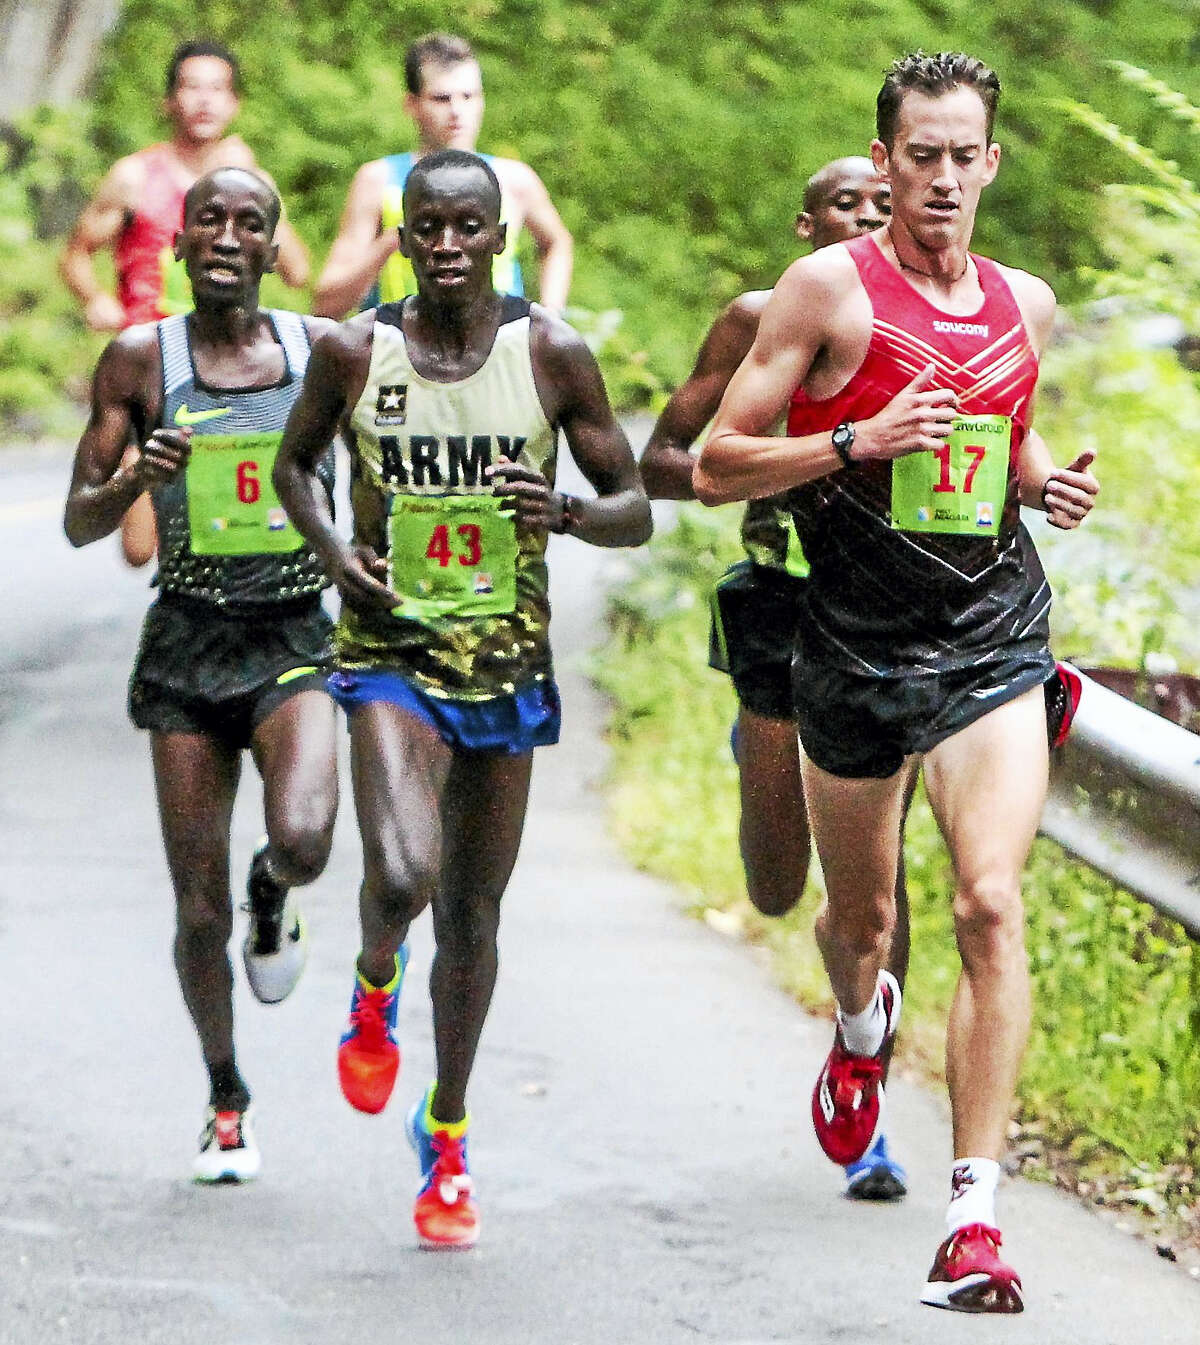 Men’s 20k winner Leonard Korir looks to take over the lead through the East Rock Park stretch during the 39th Annual New Haven Road Race 20K Championship Monday, September 5, 2016.